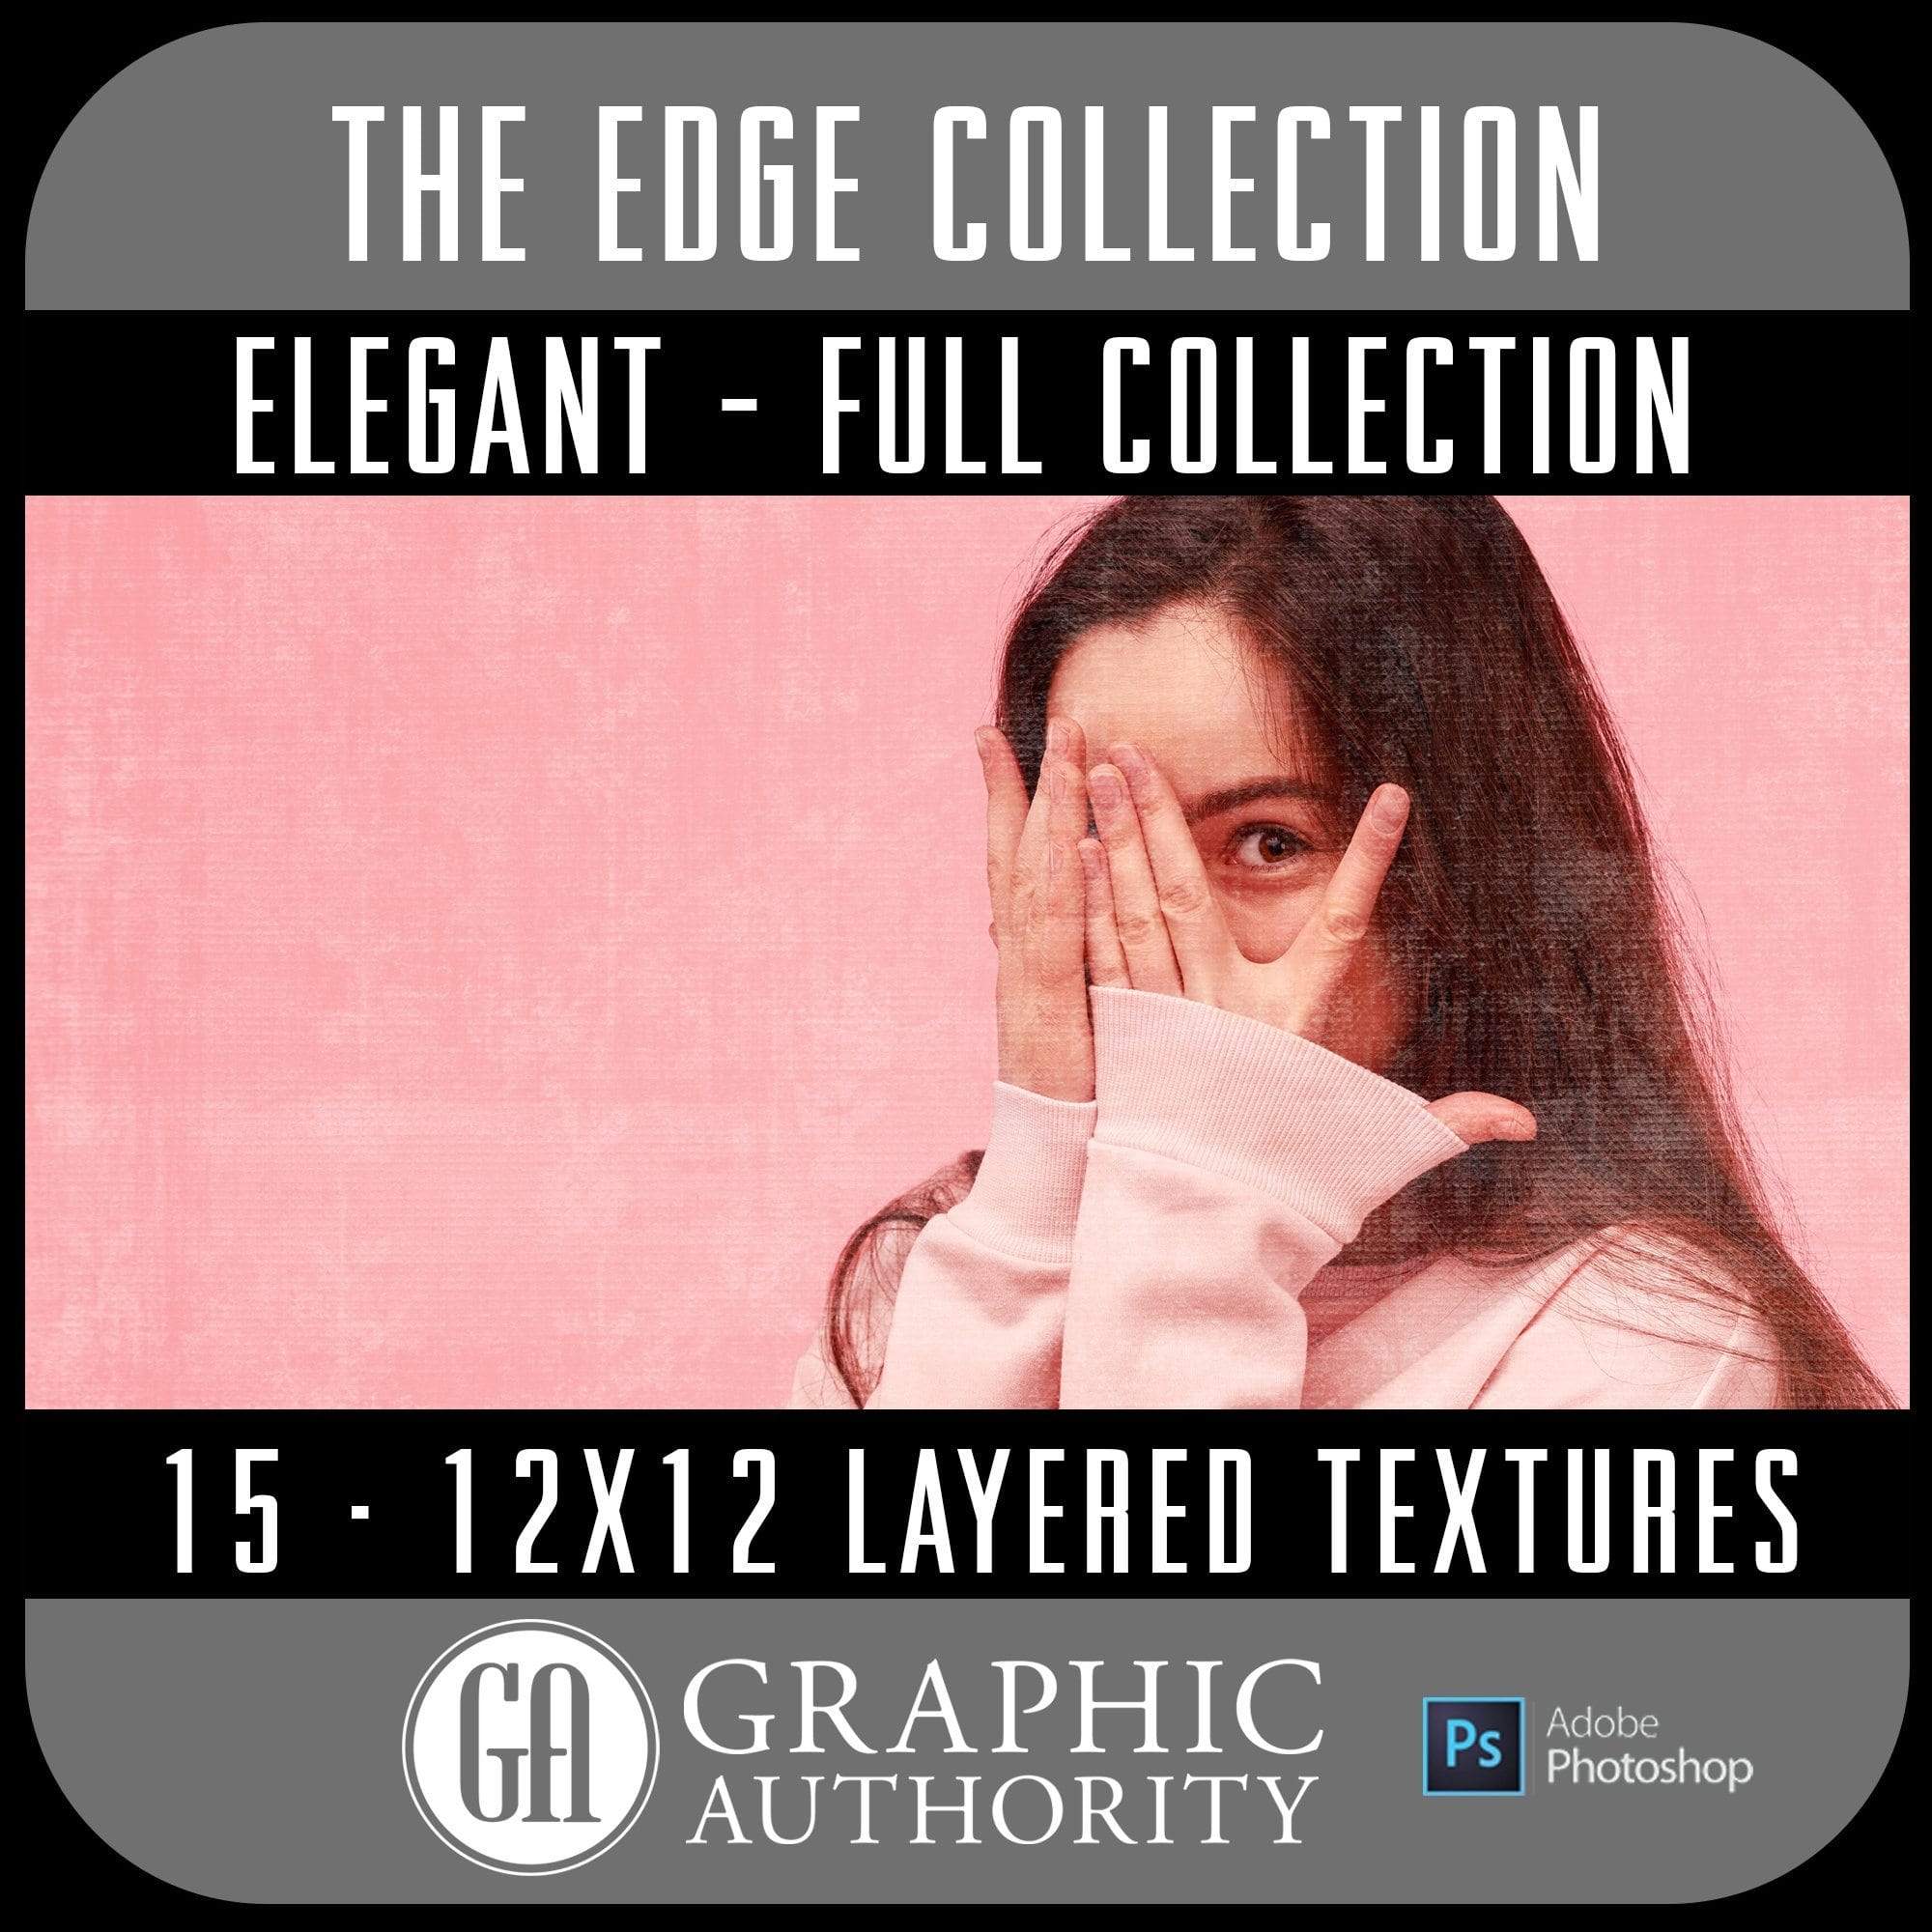 The EDGE - Elegant - Layered Textures - Full Collection-Photoshop Template - Graphic Authority